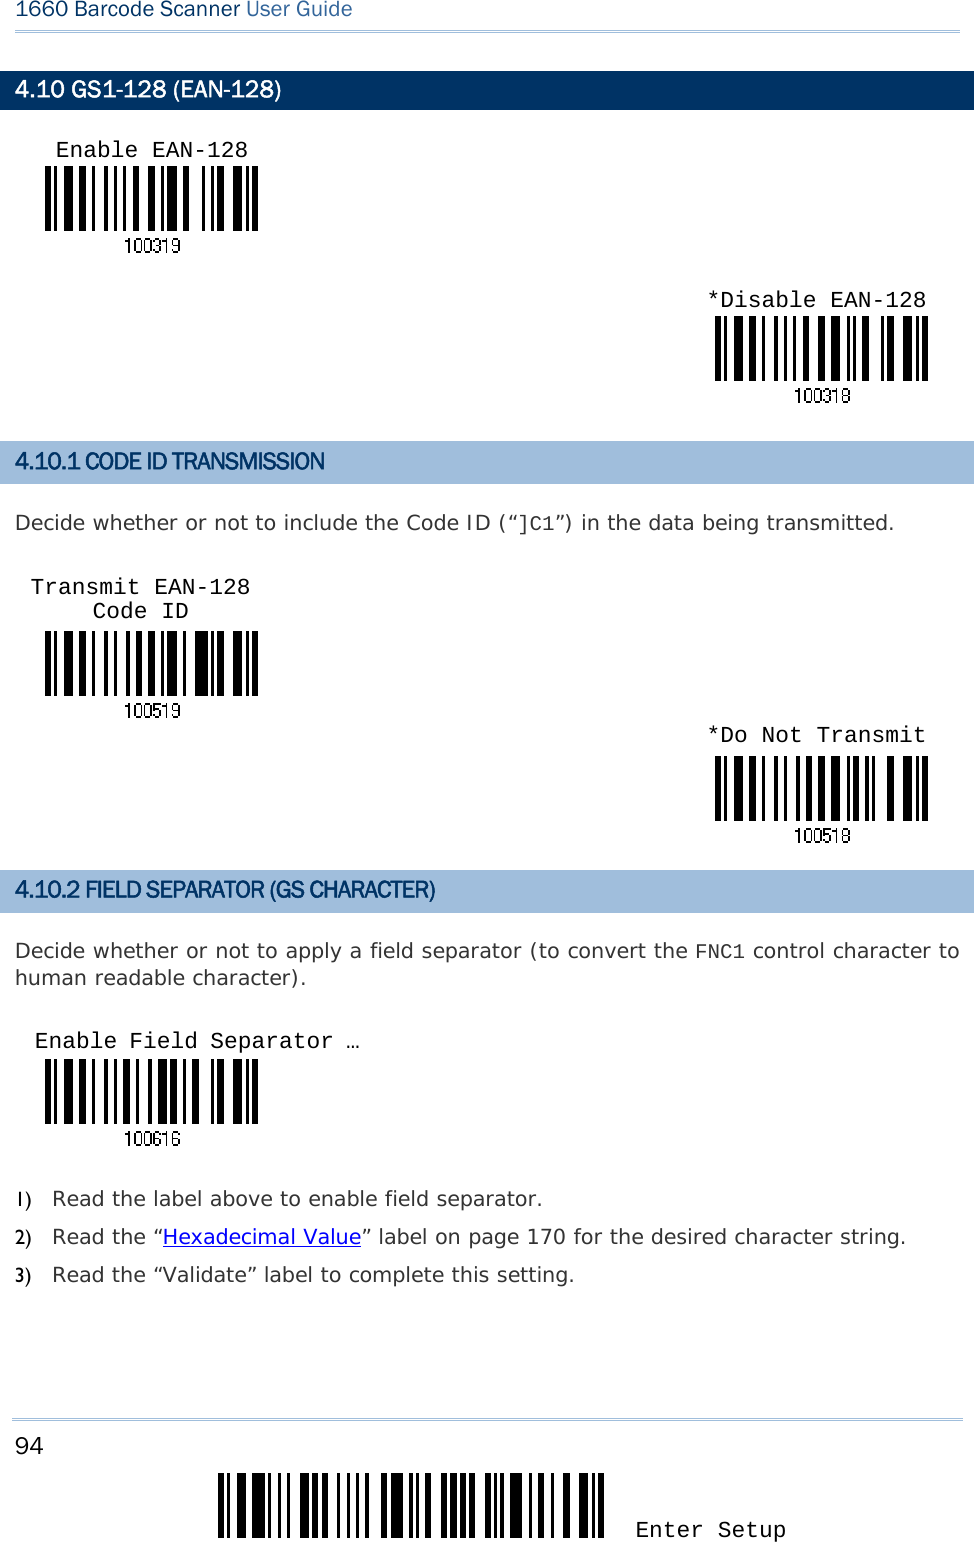 94 Enter Setup 1660 Barcode Scanner User Guide  4.10 GS1-128 (EAN-128)   4.10.1 CODE ID TRANSMISSION Decide whether or not to include the Code ID (“]C1”) in the data being transmitted.     4.10.2 FIELD SEPARATOR (GS CHARACTER) Decide whether or not to apply a field separator (to convert the FNC1 control character to human readable character).    1) Read the label above to enable field separator. 2) Read the “Hexadecimal Value” label on page 170 for the desired character string.  3) Read the “Validate” label to complete this setting. Enable EAN-128*Disable EAN-128Transmit EAN-128 Code ID *Do Not TransmitEnable Field Separator … 